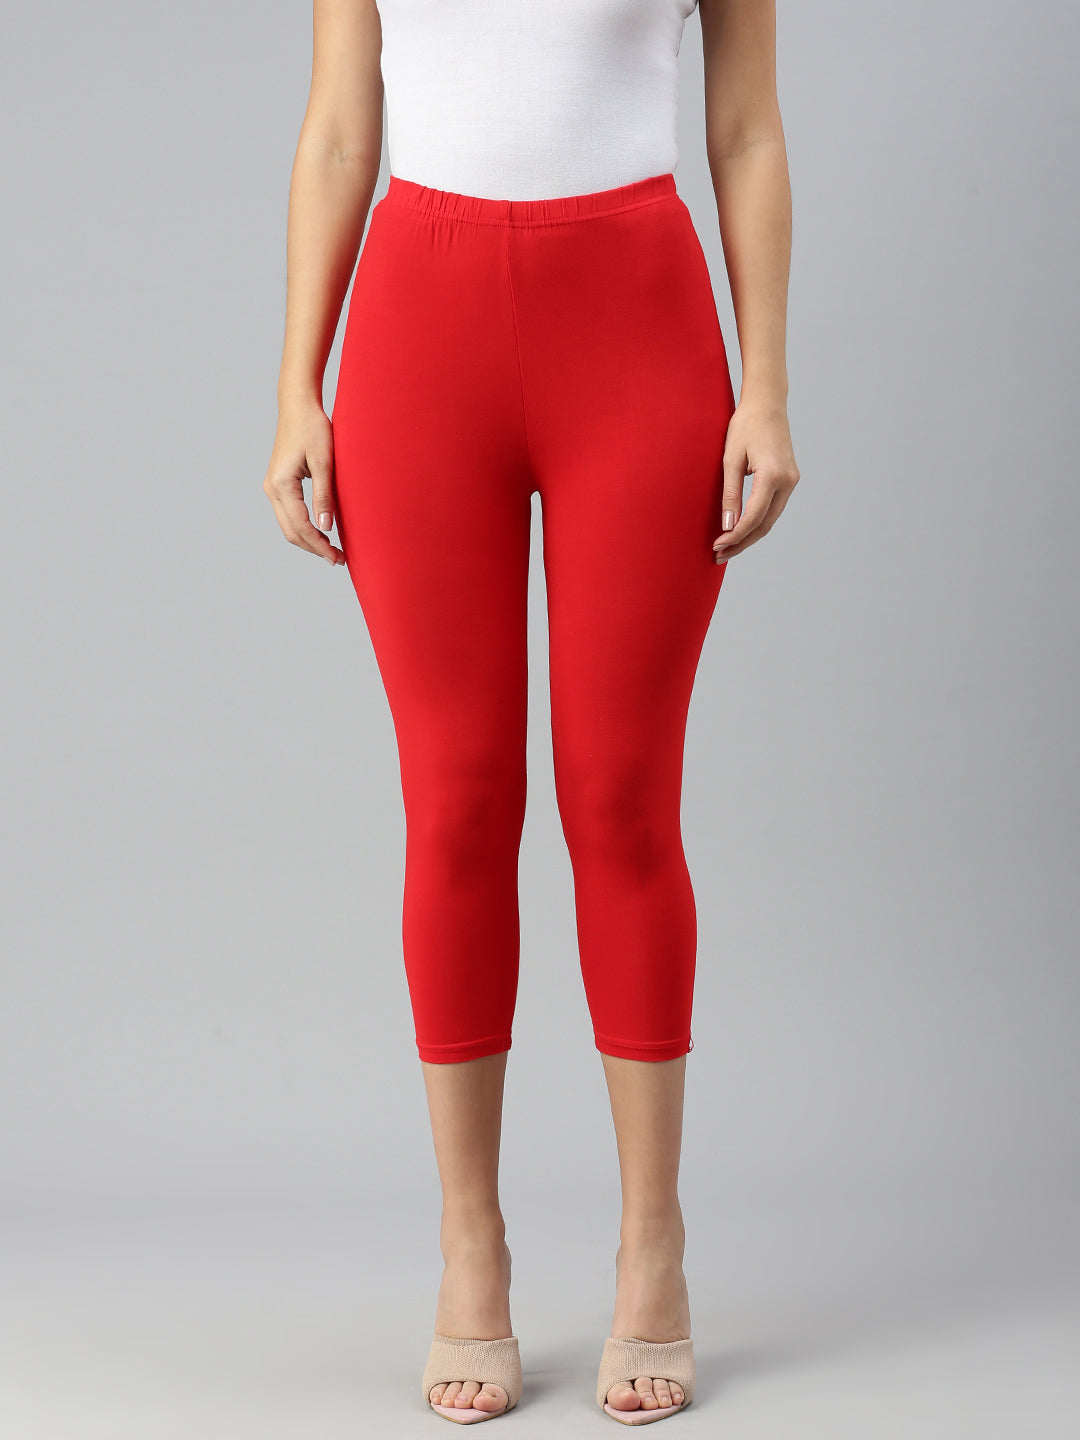 Shop Prisma's Red Capri Leggings for Comfortable and Stylish Workout Wear